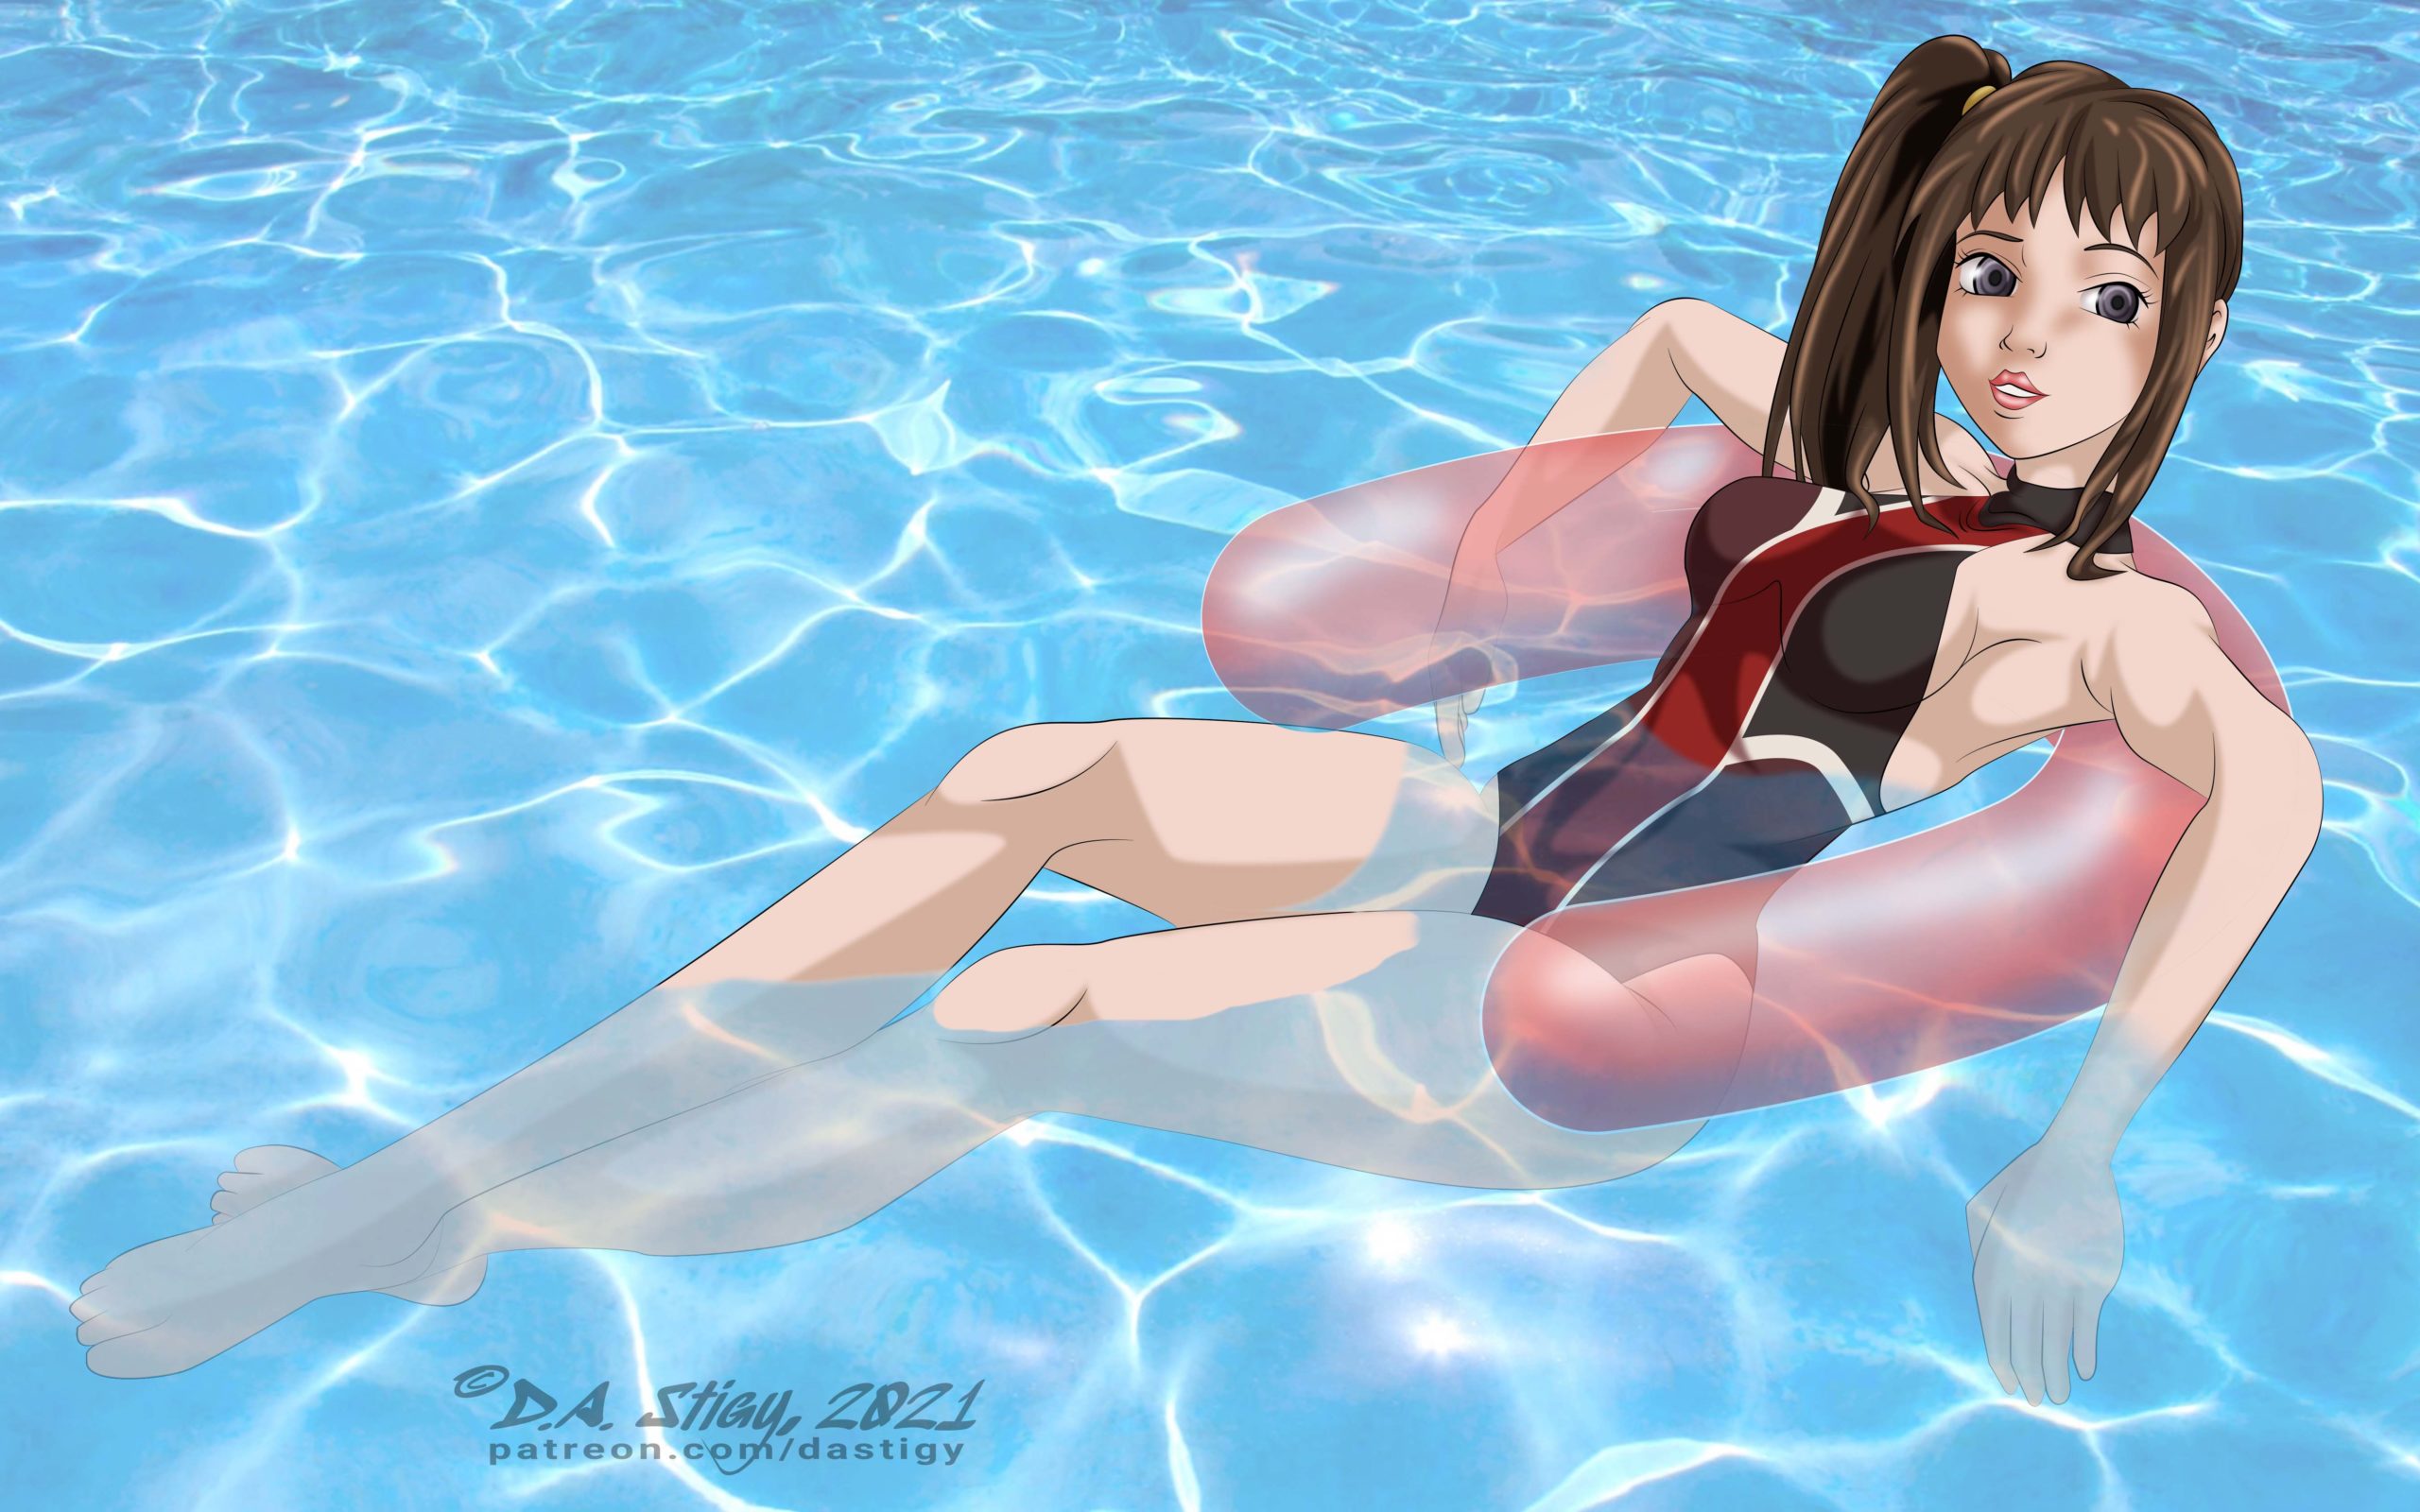 Kara floating in a pool on an inflatable tube